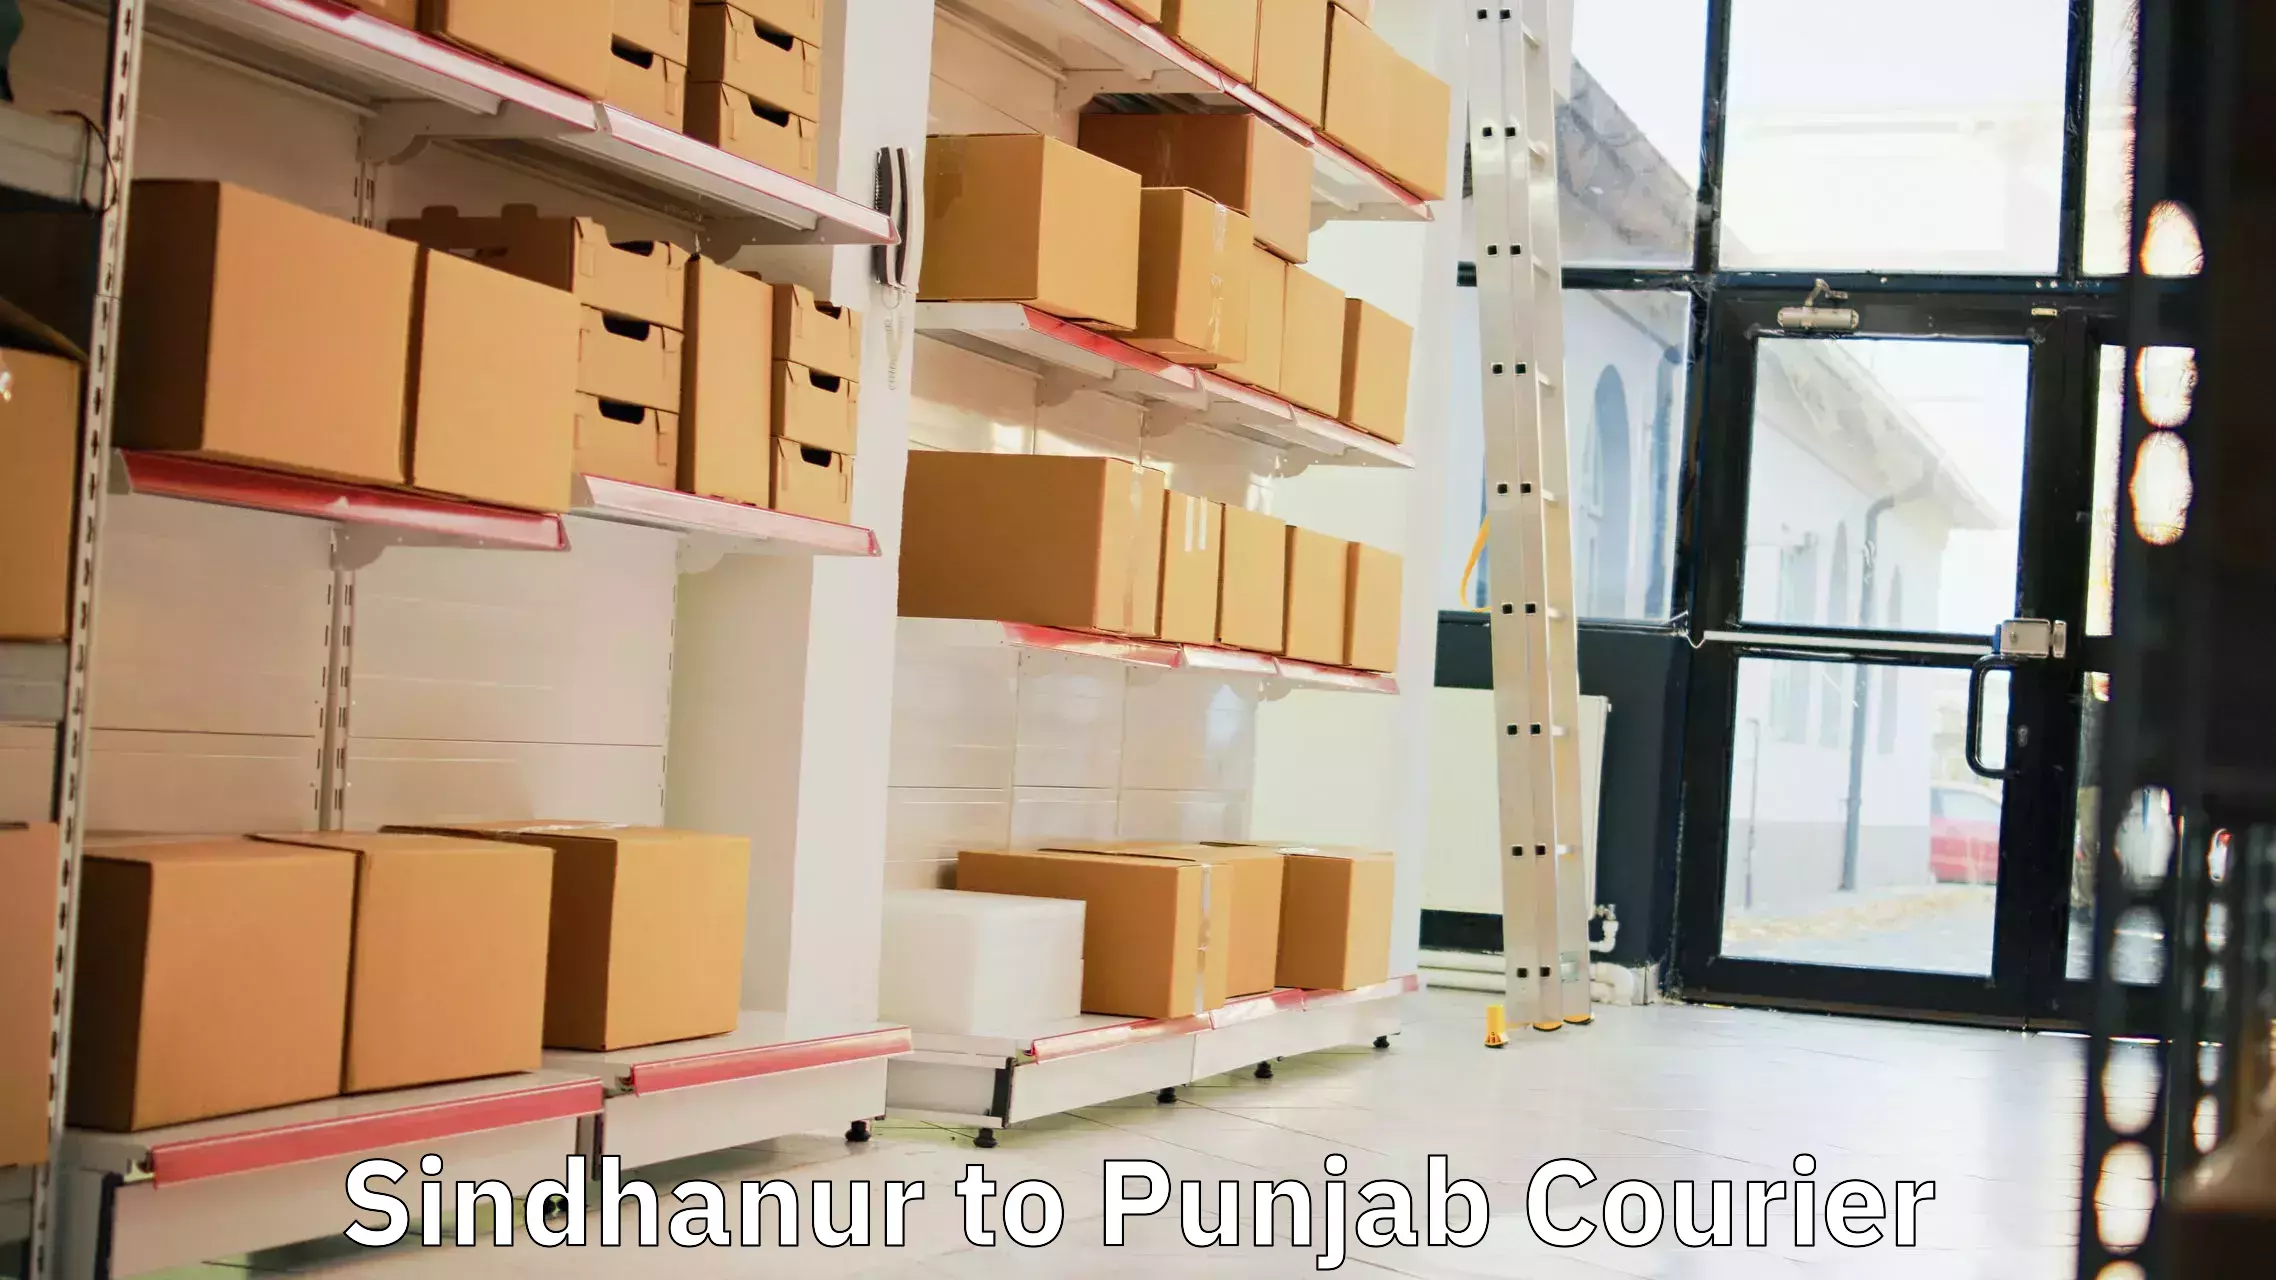 Nationwide shipping services Sindhanur to Jhunir